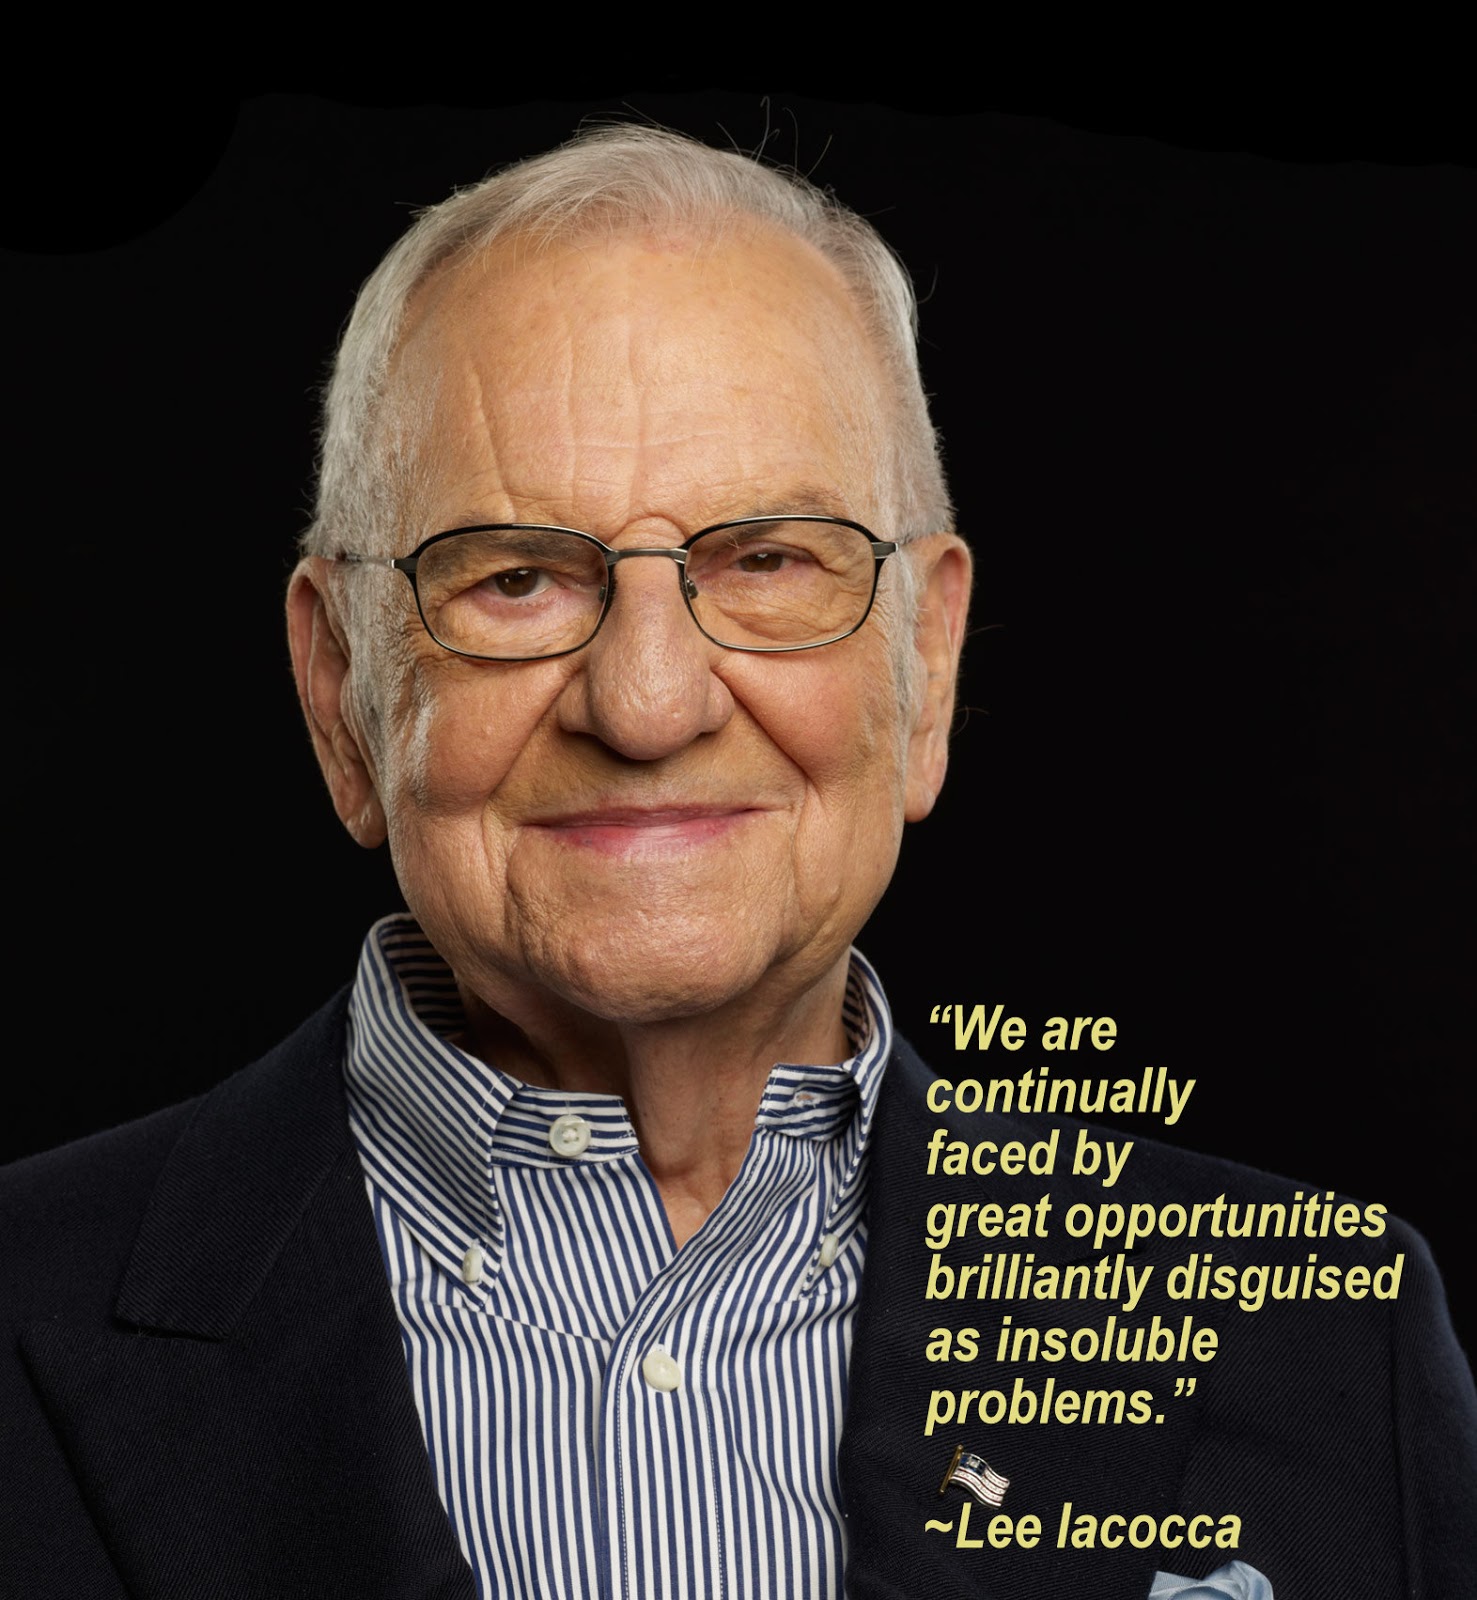 Lee Iacocca's quote #4